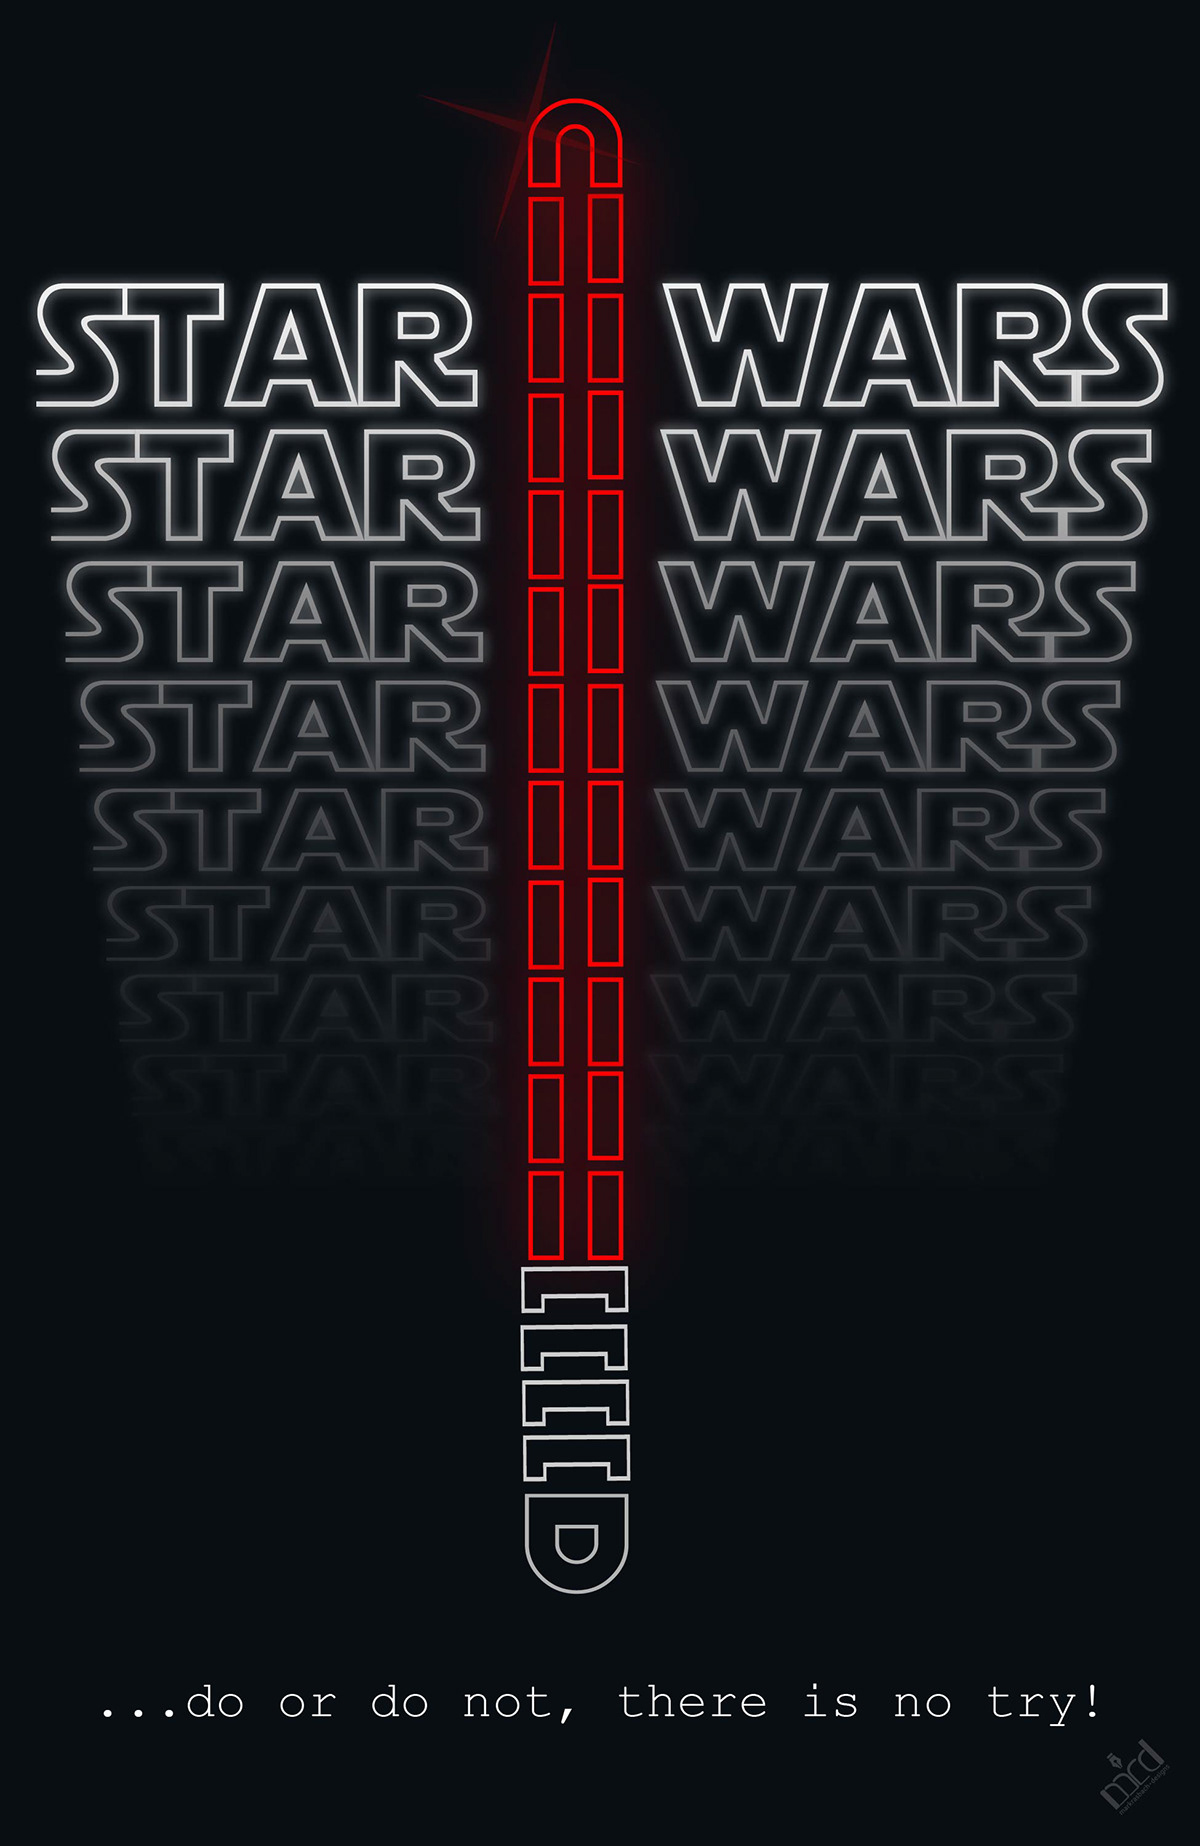 star wars posters